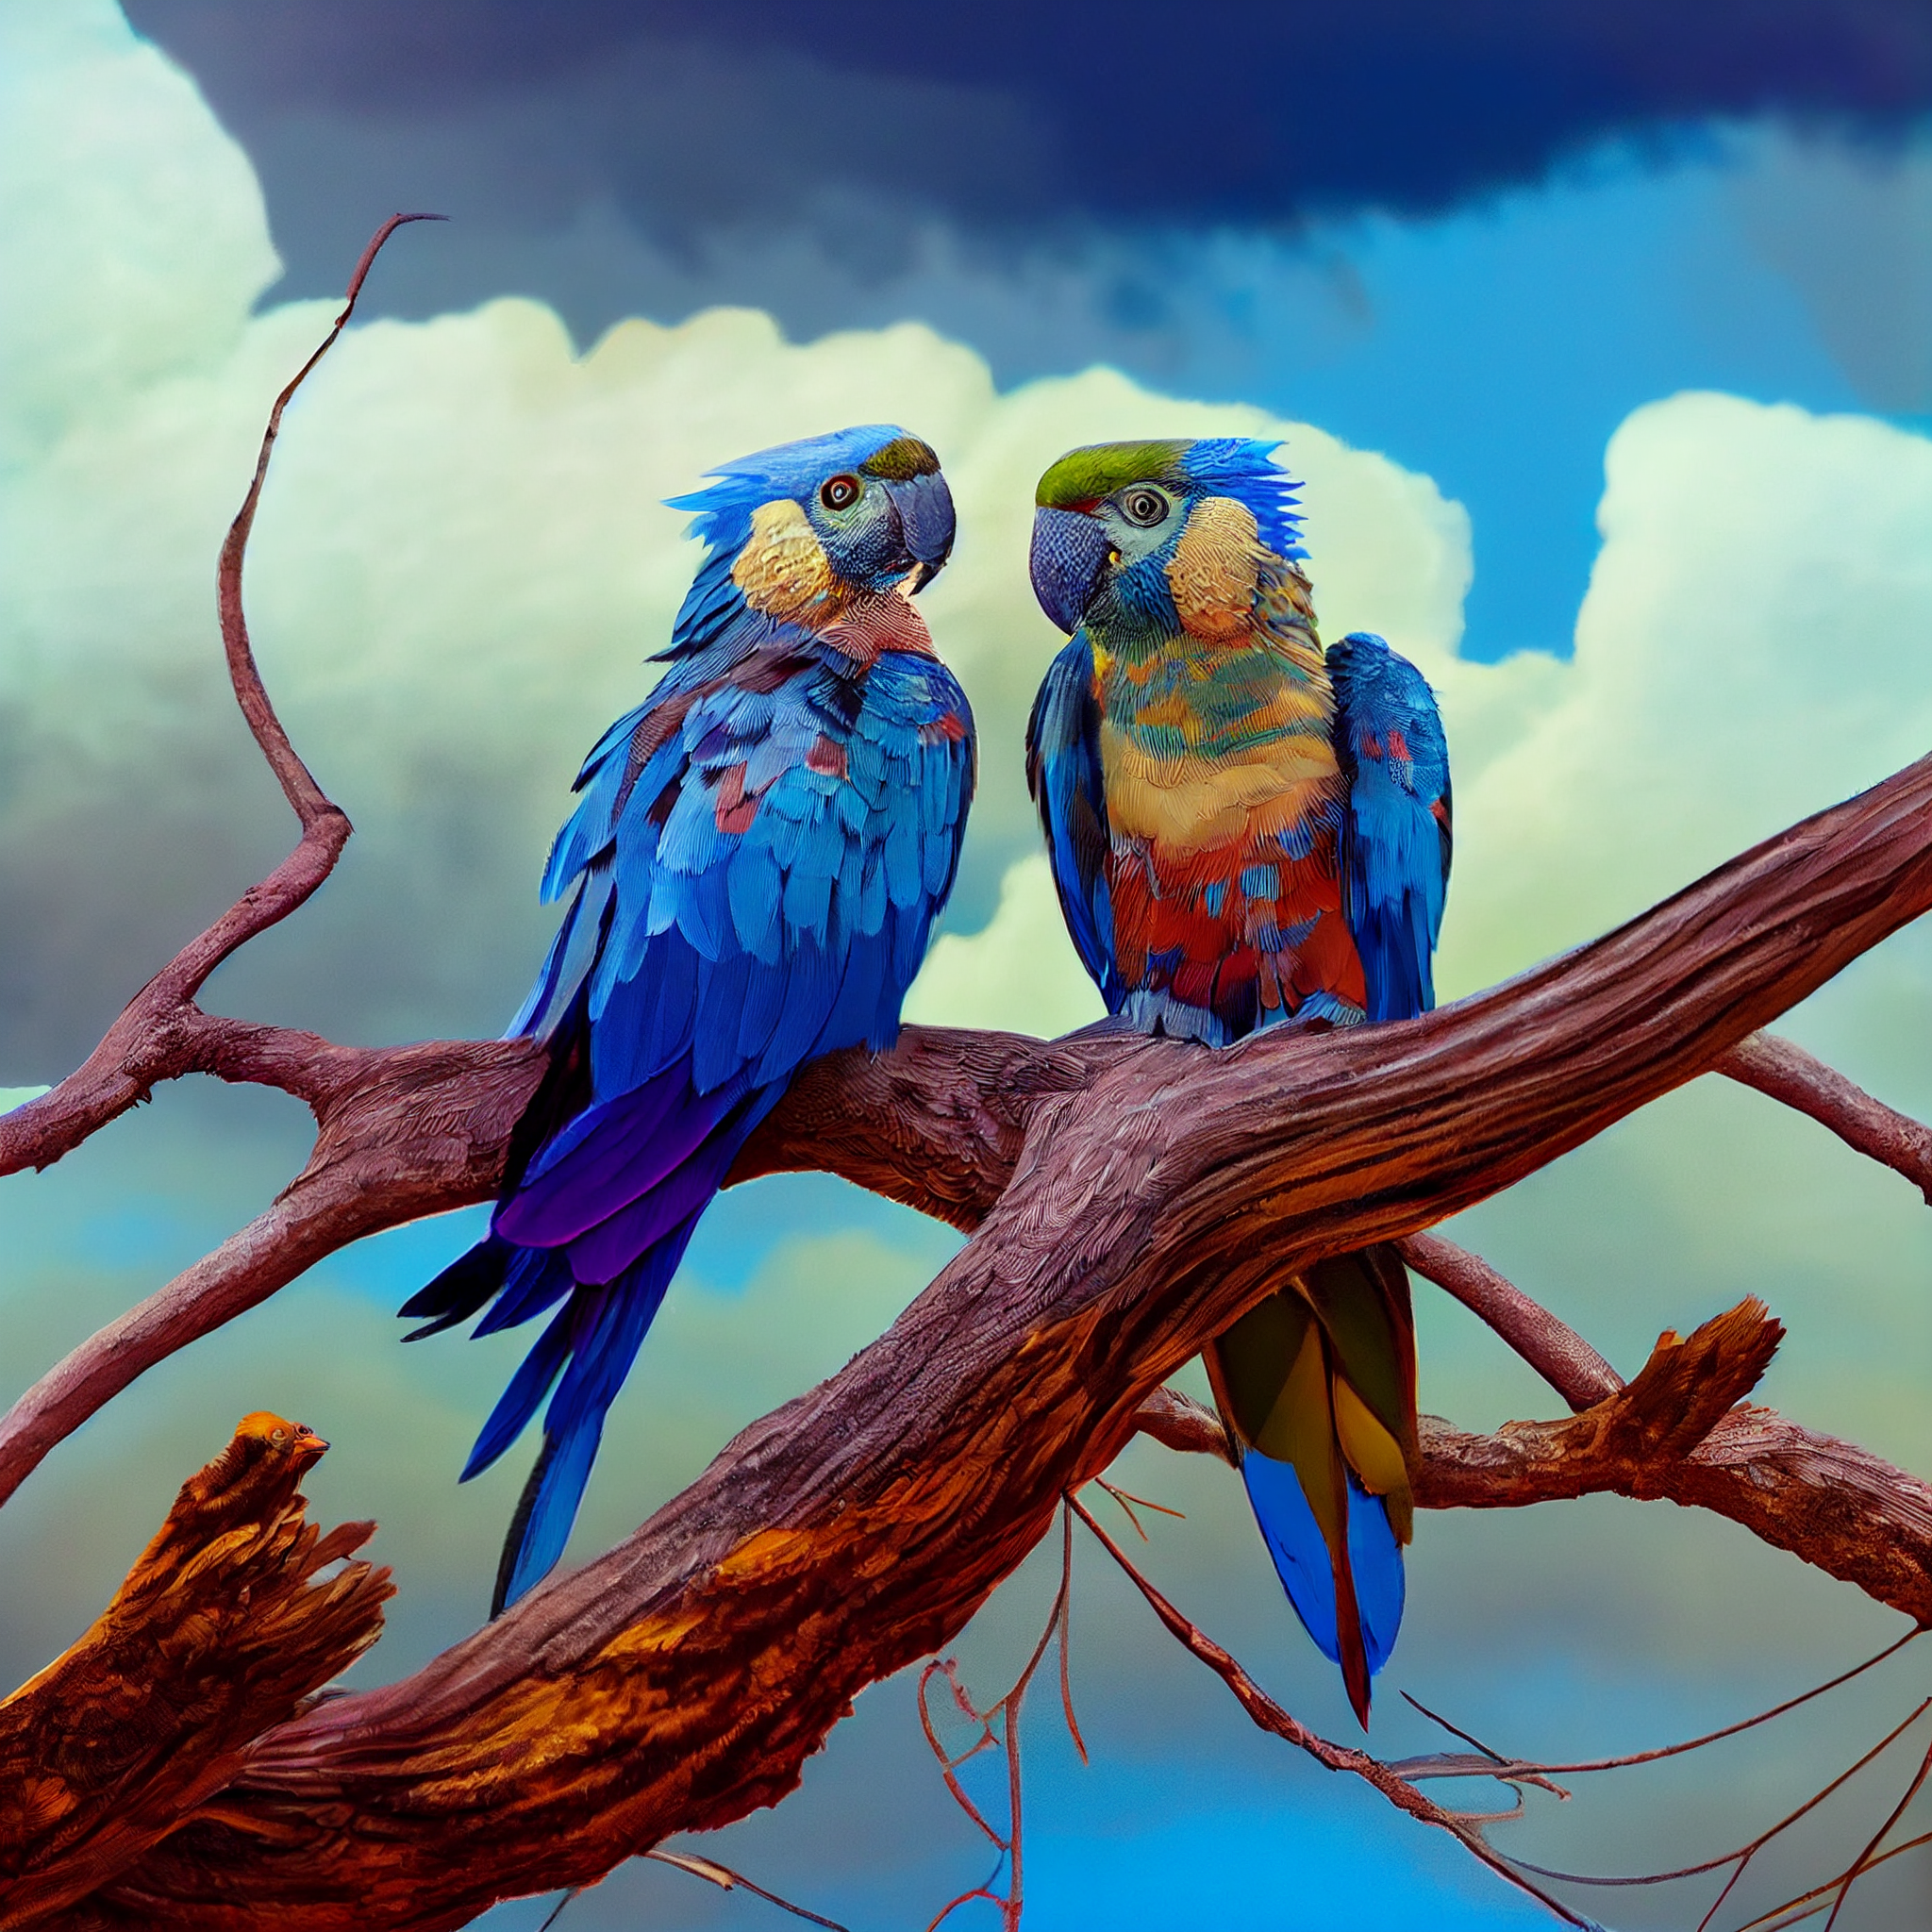 Paradise Perch: A Stunning Painting Print of Two Wild Parrots on a Branch, Ideal for Living Room, Office, and Bedroom Decor